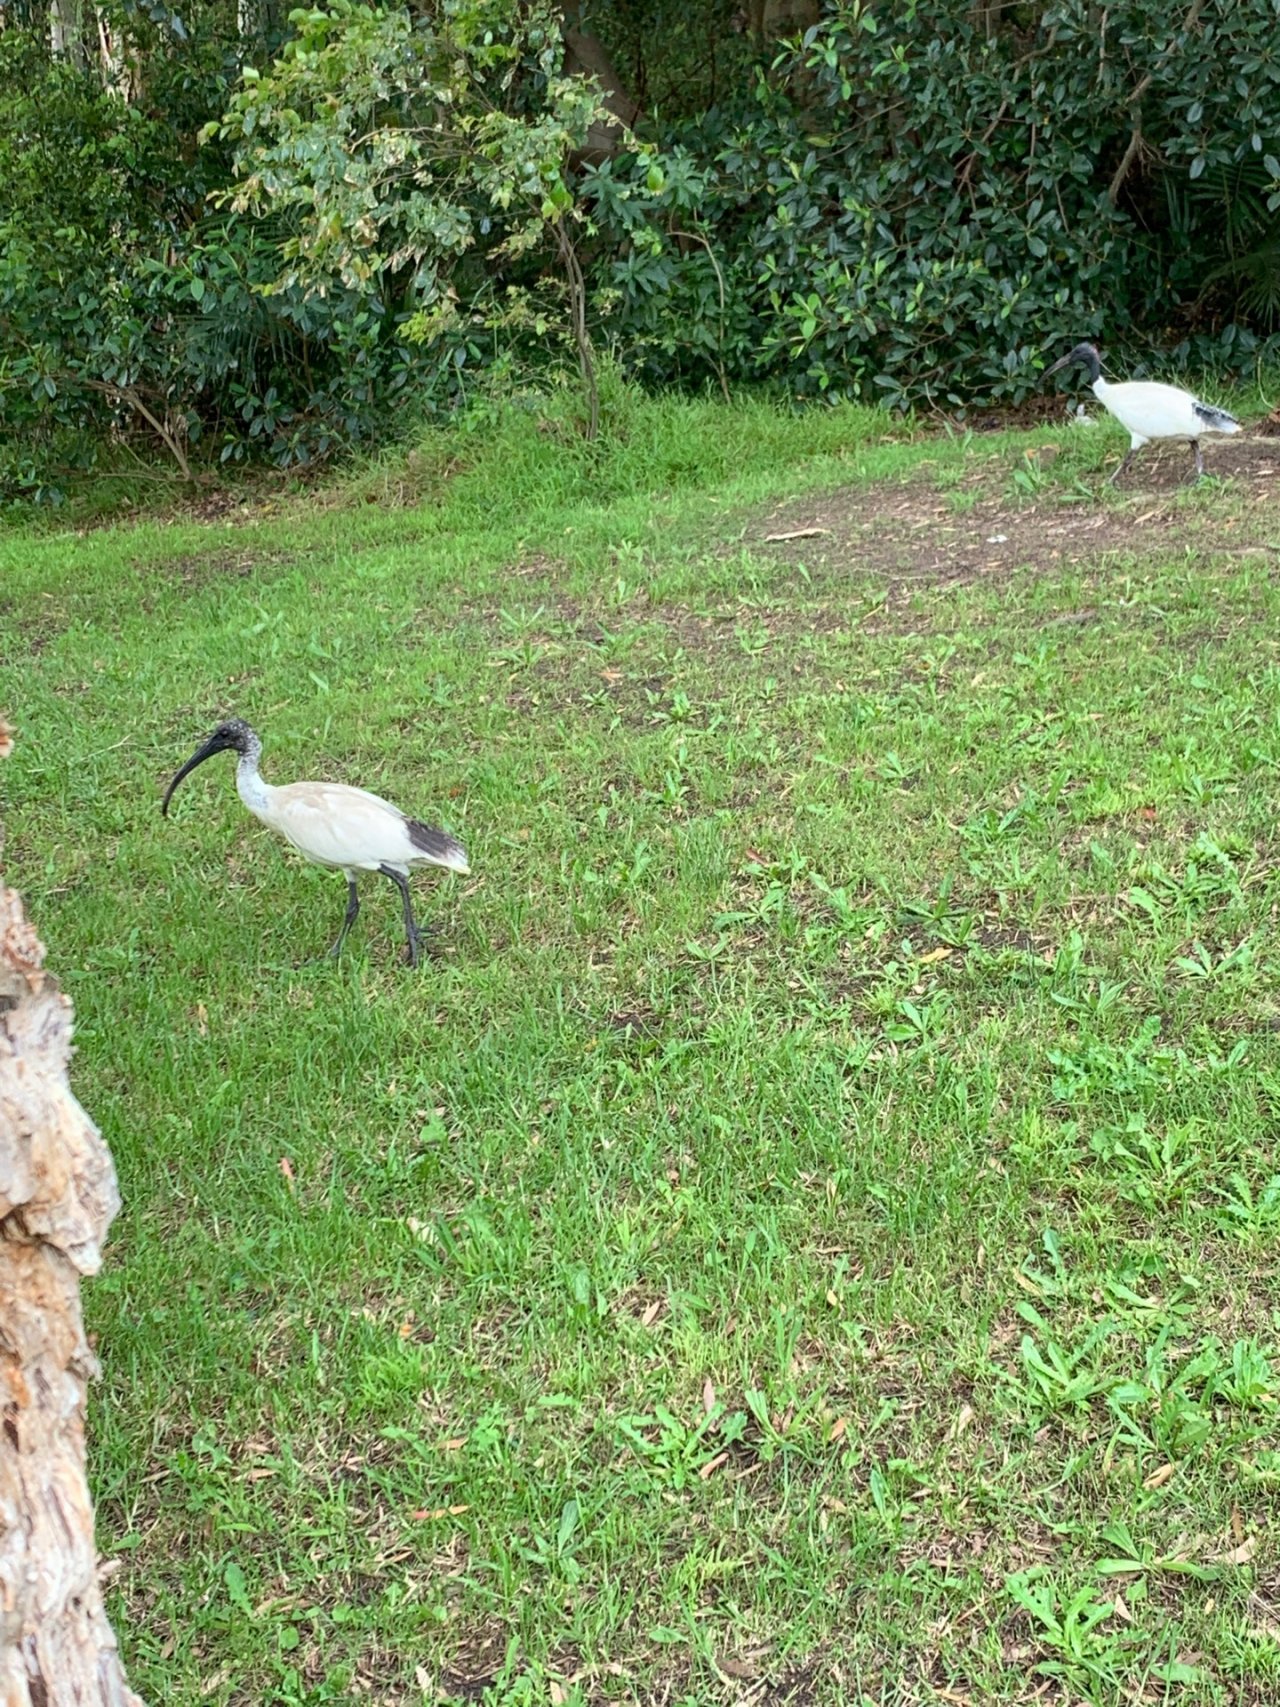 White Ibis in Big City Birds App spotted by Sean Serduk on 06.01.2021